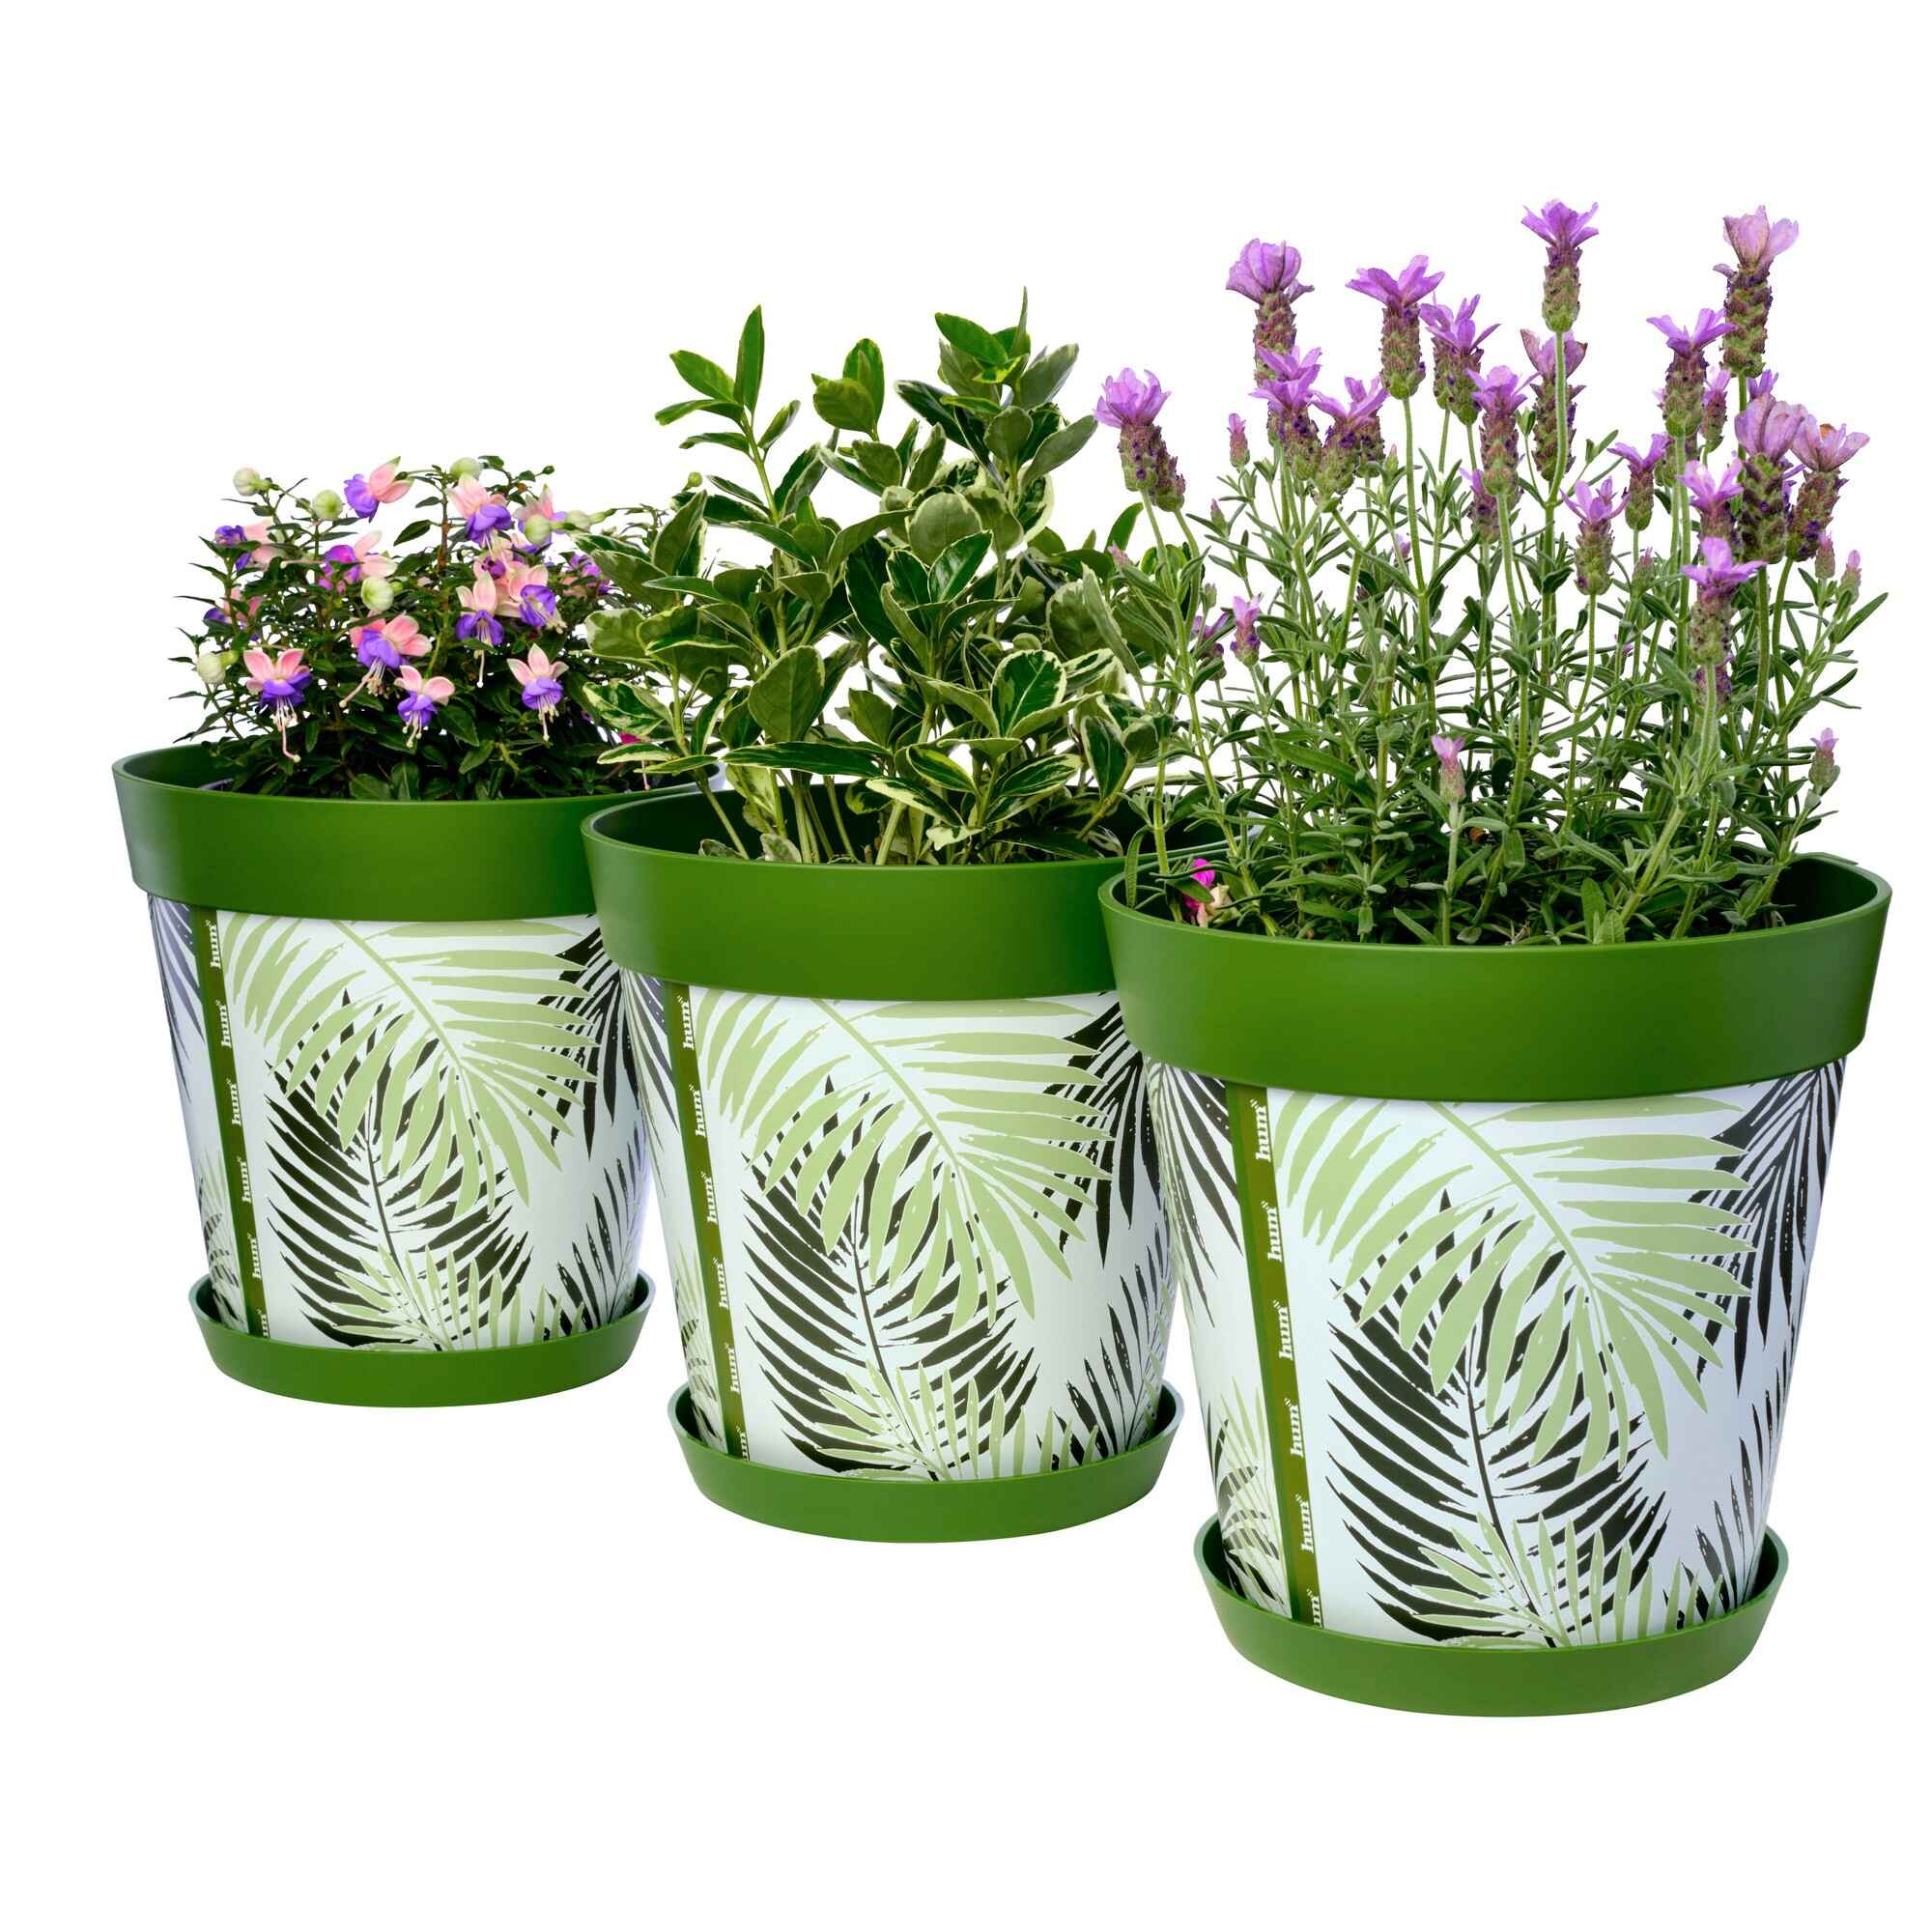 Picture of 3 Planted Large 25cm Green Fern Leaves Pattern Indoor/Outdoor Flower Pot and Saucers 